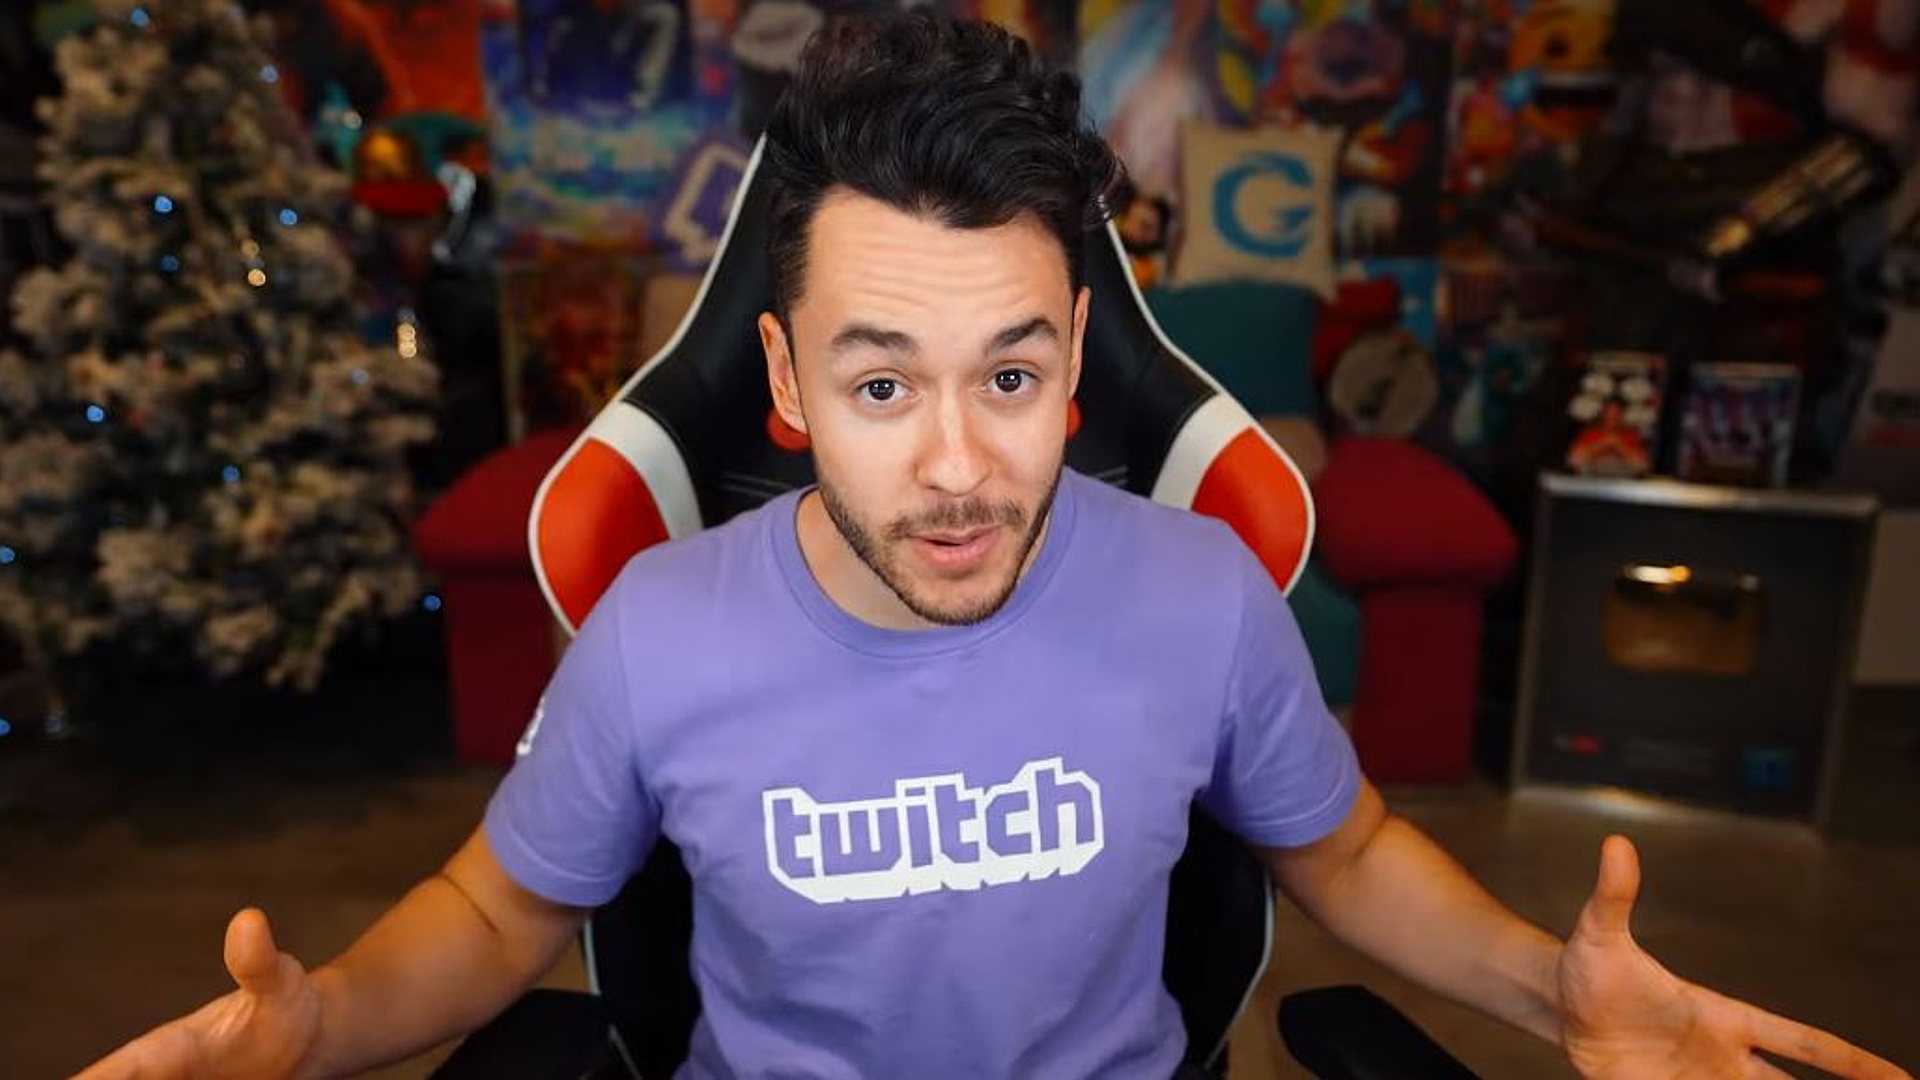 TheGrefg honored Twitch's Hispanic and Latino community, and 1.75 million  concurrent viewers tuned in - Tubefilter